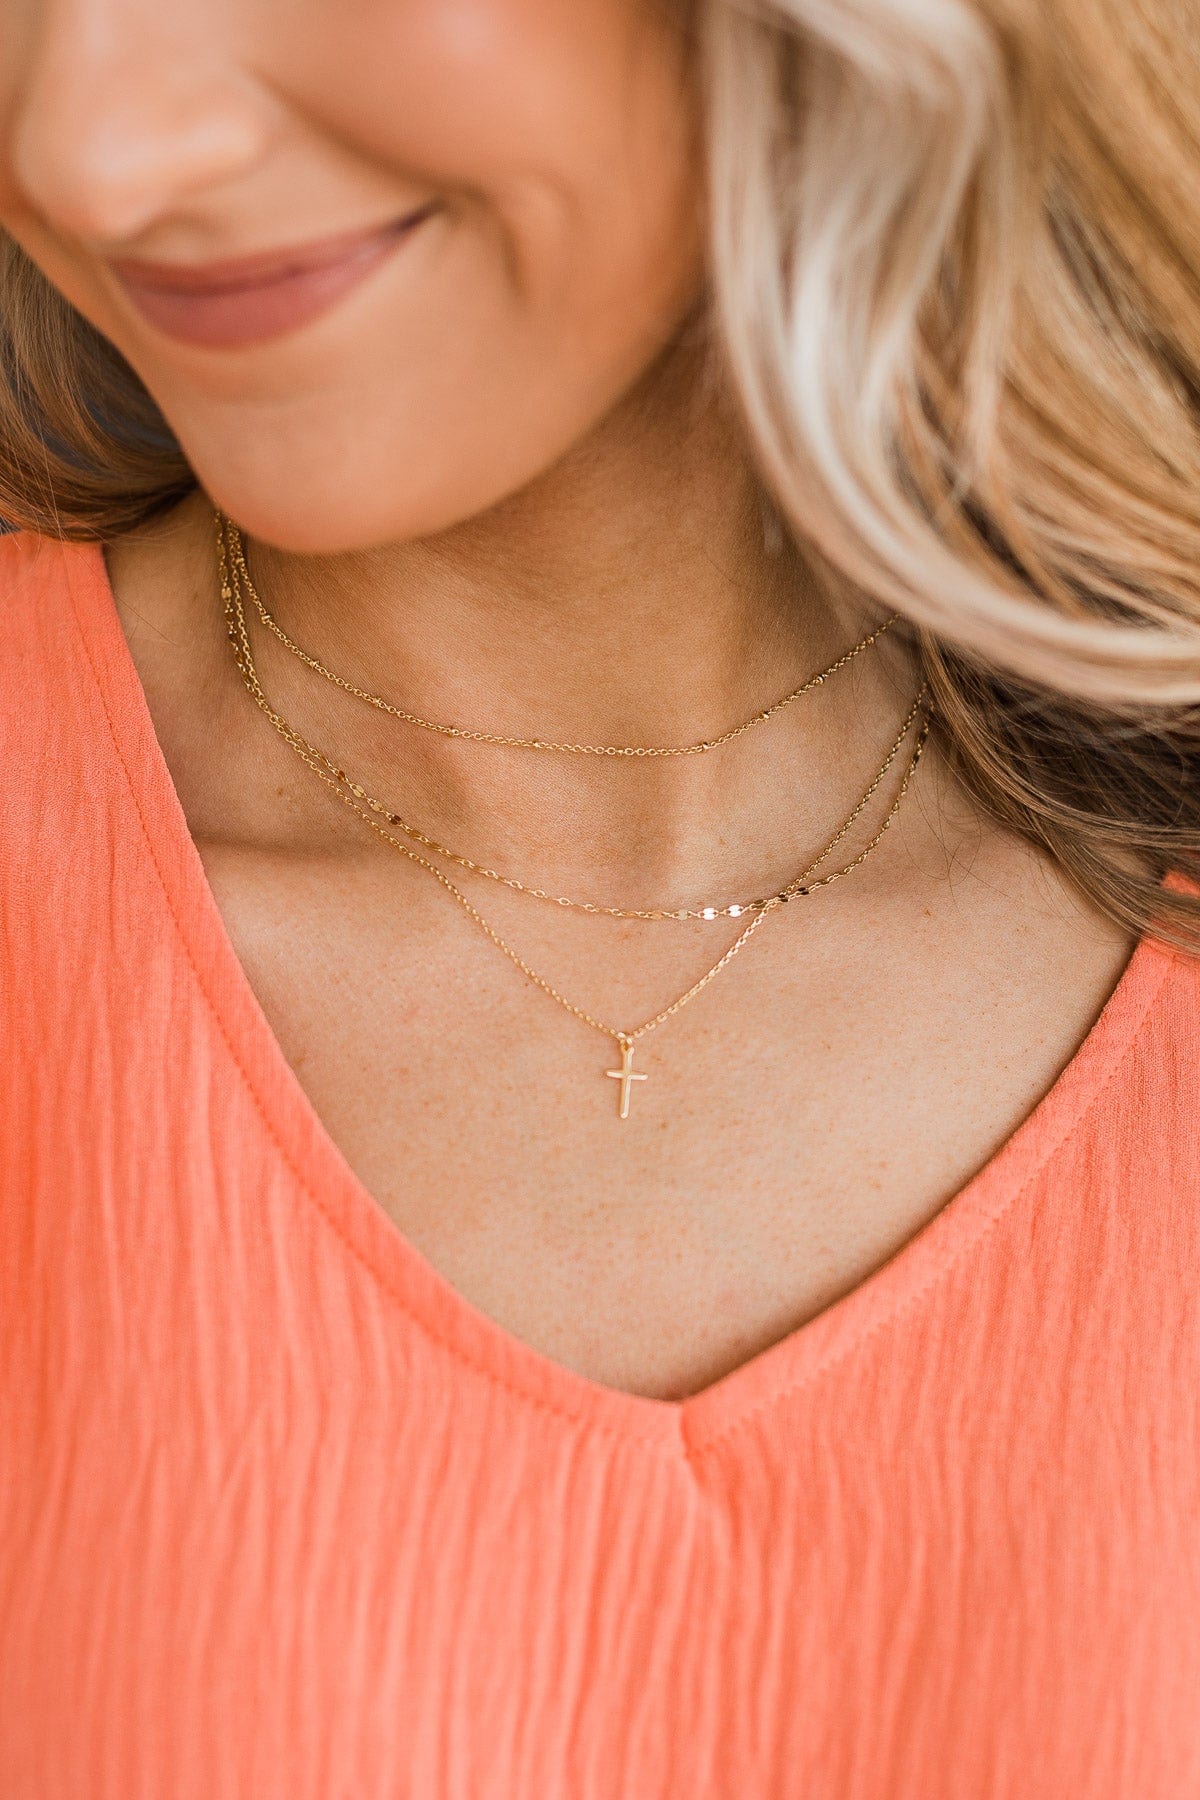 Know Your Heart 3-Tier Cross Necklace- Gold